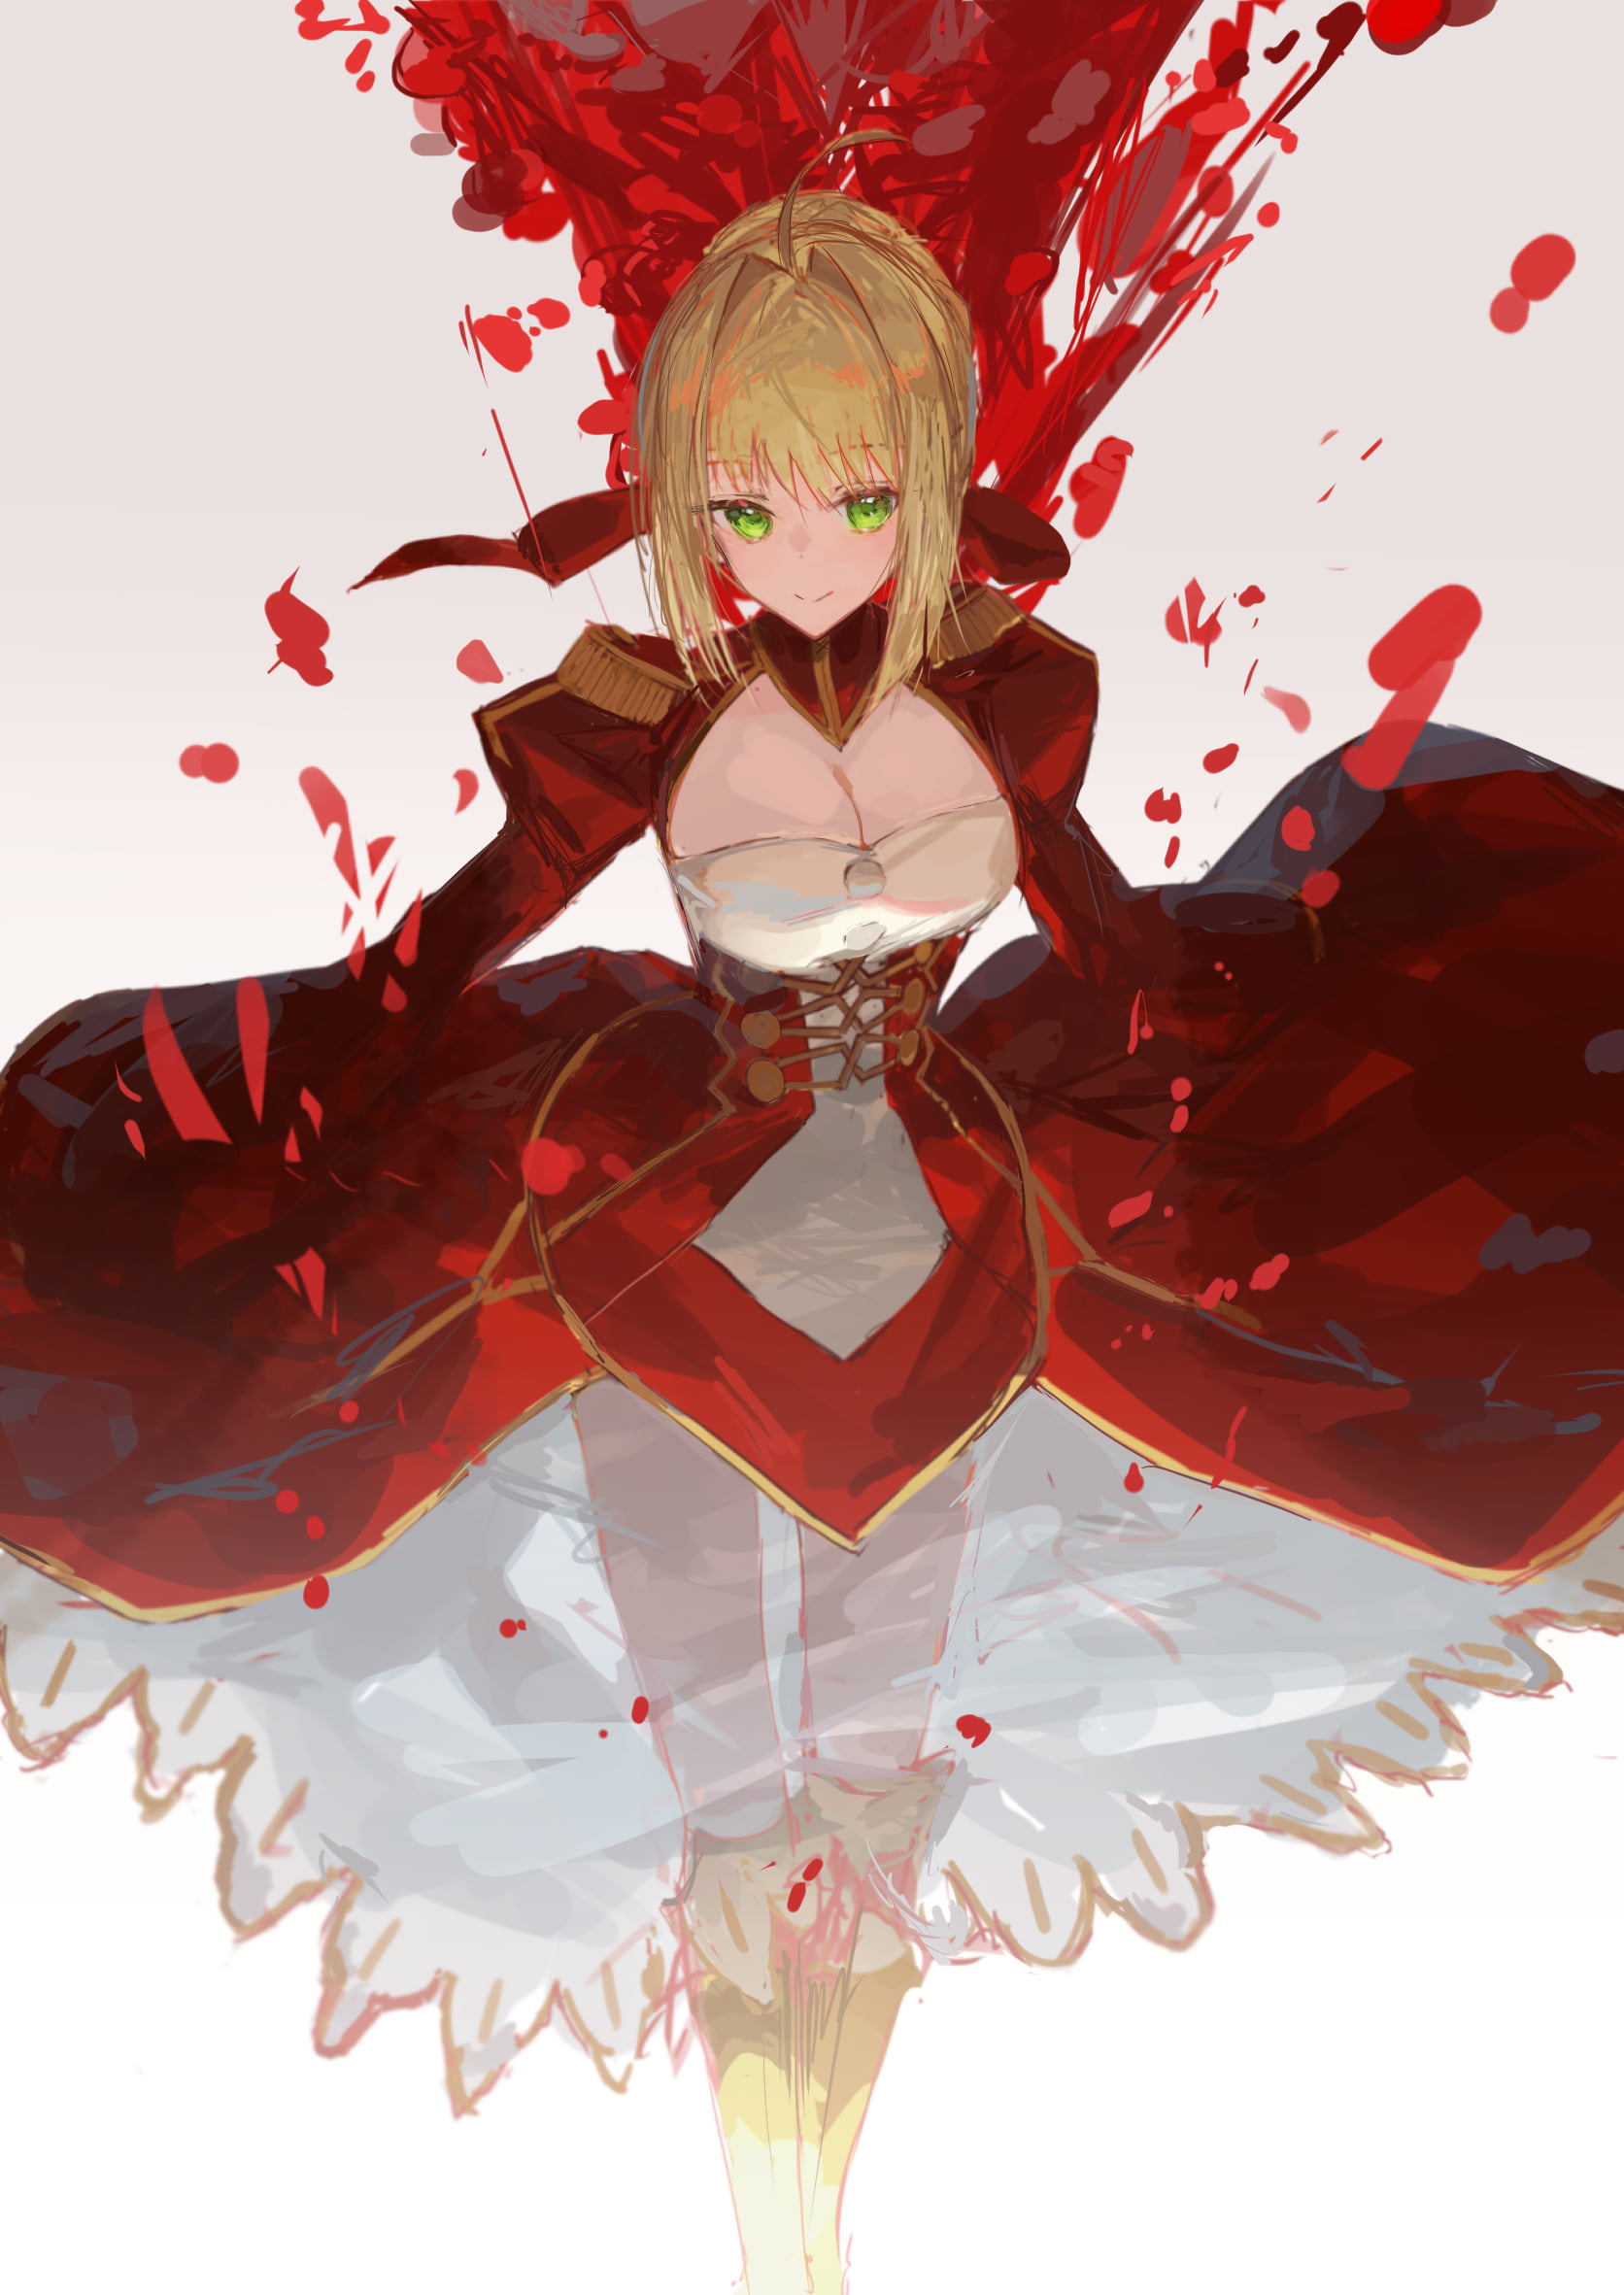 anime, anime girls, Fate series, Fate/Extra, Fate/Extra CCC